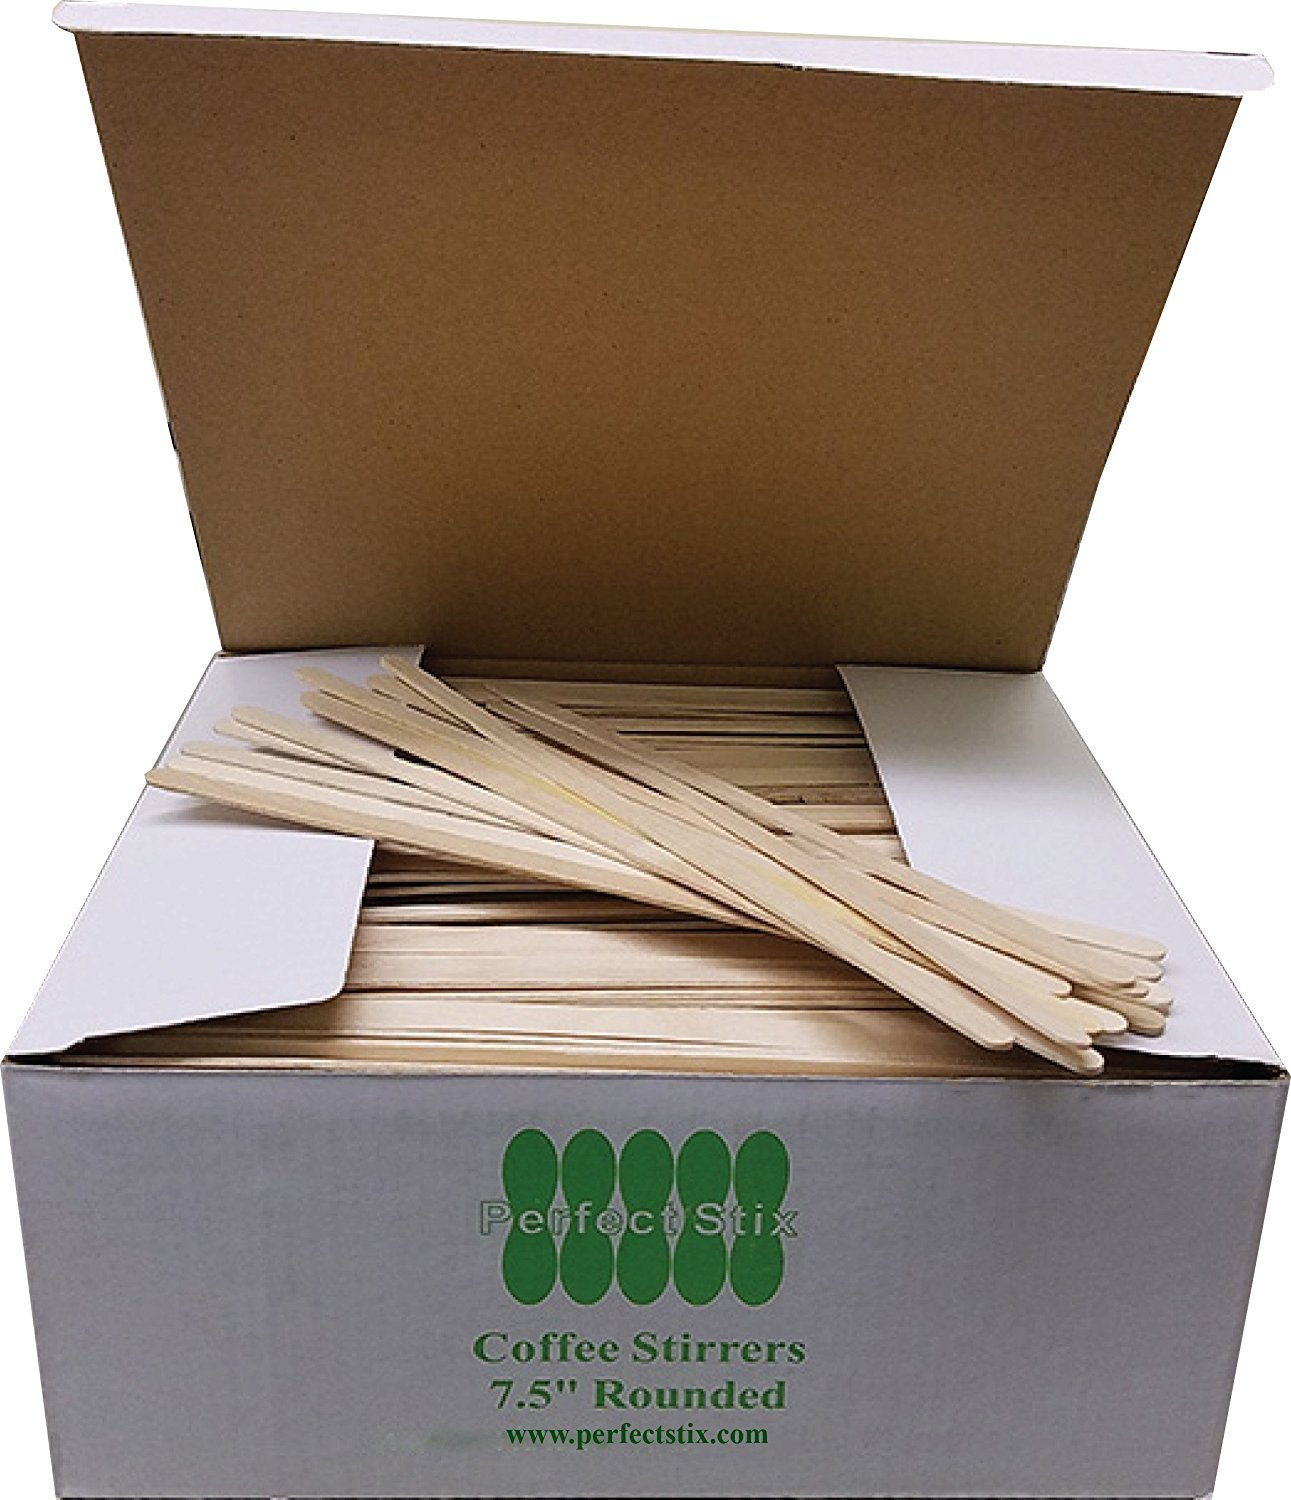 5 Coffee Stirrers With Round Ends Case of 10 boxes/1,000ct = 10,000ct (  Item# FS201)